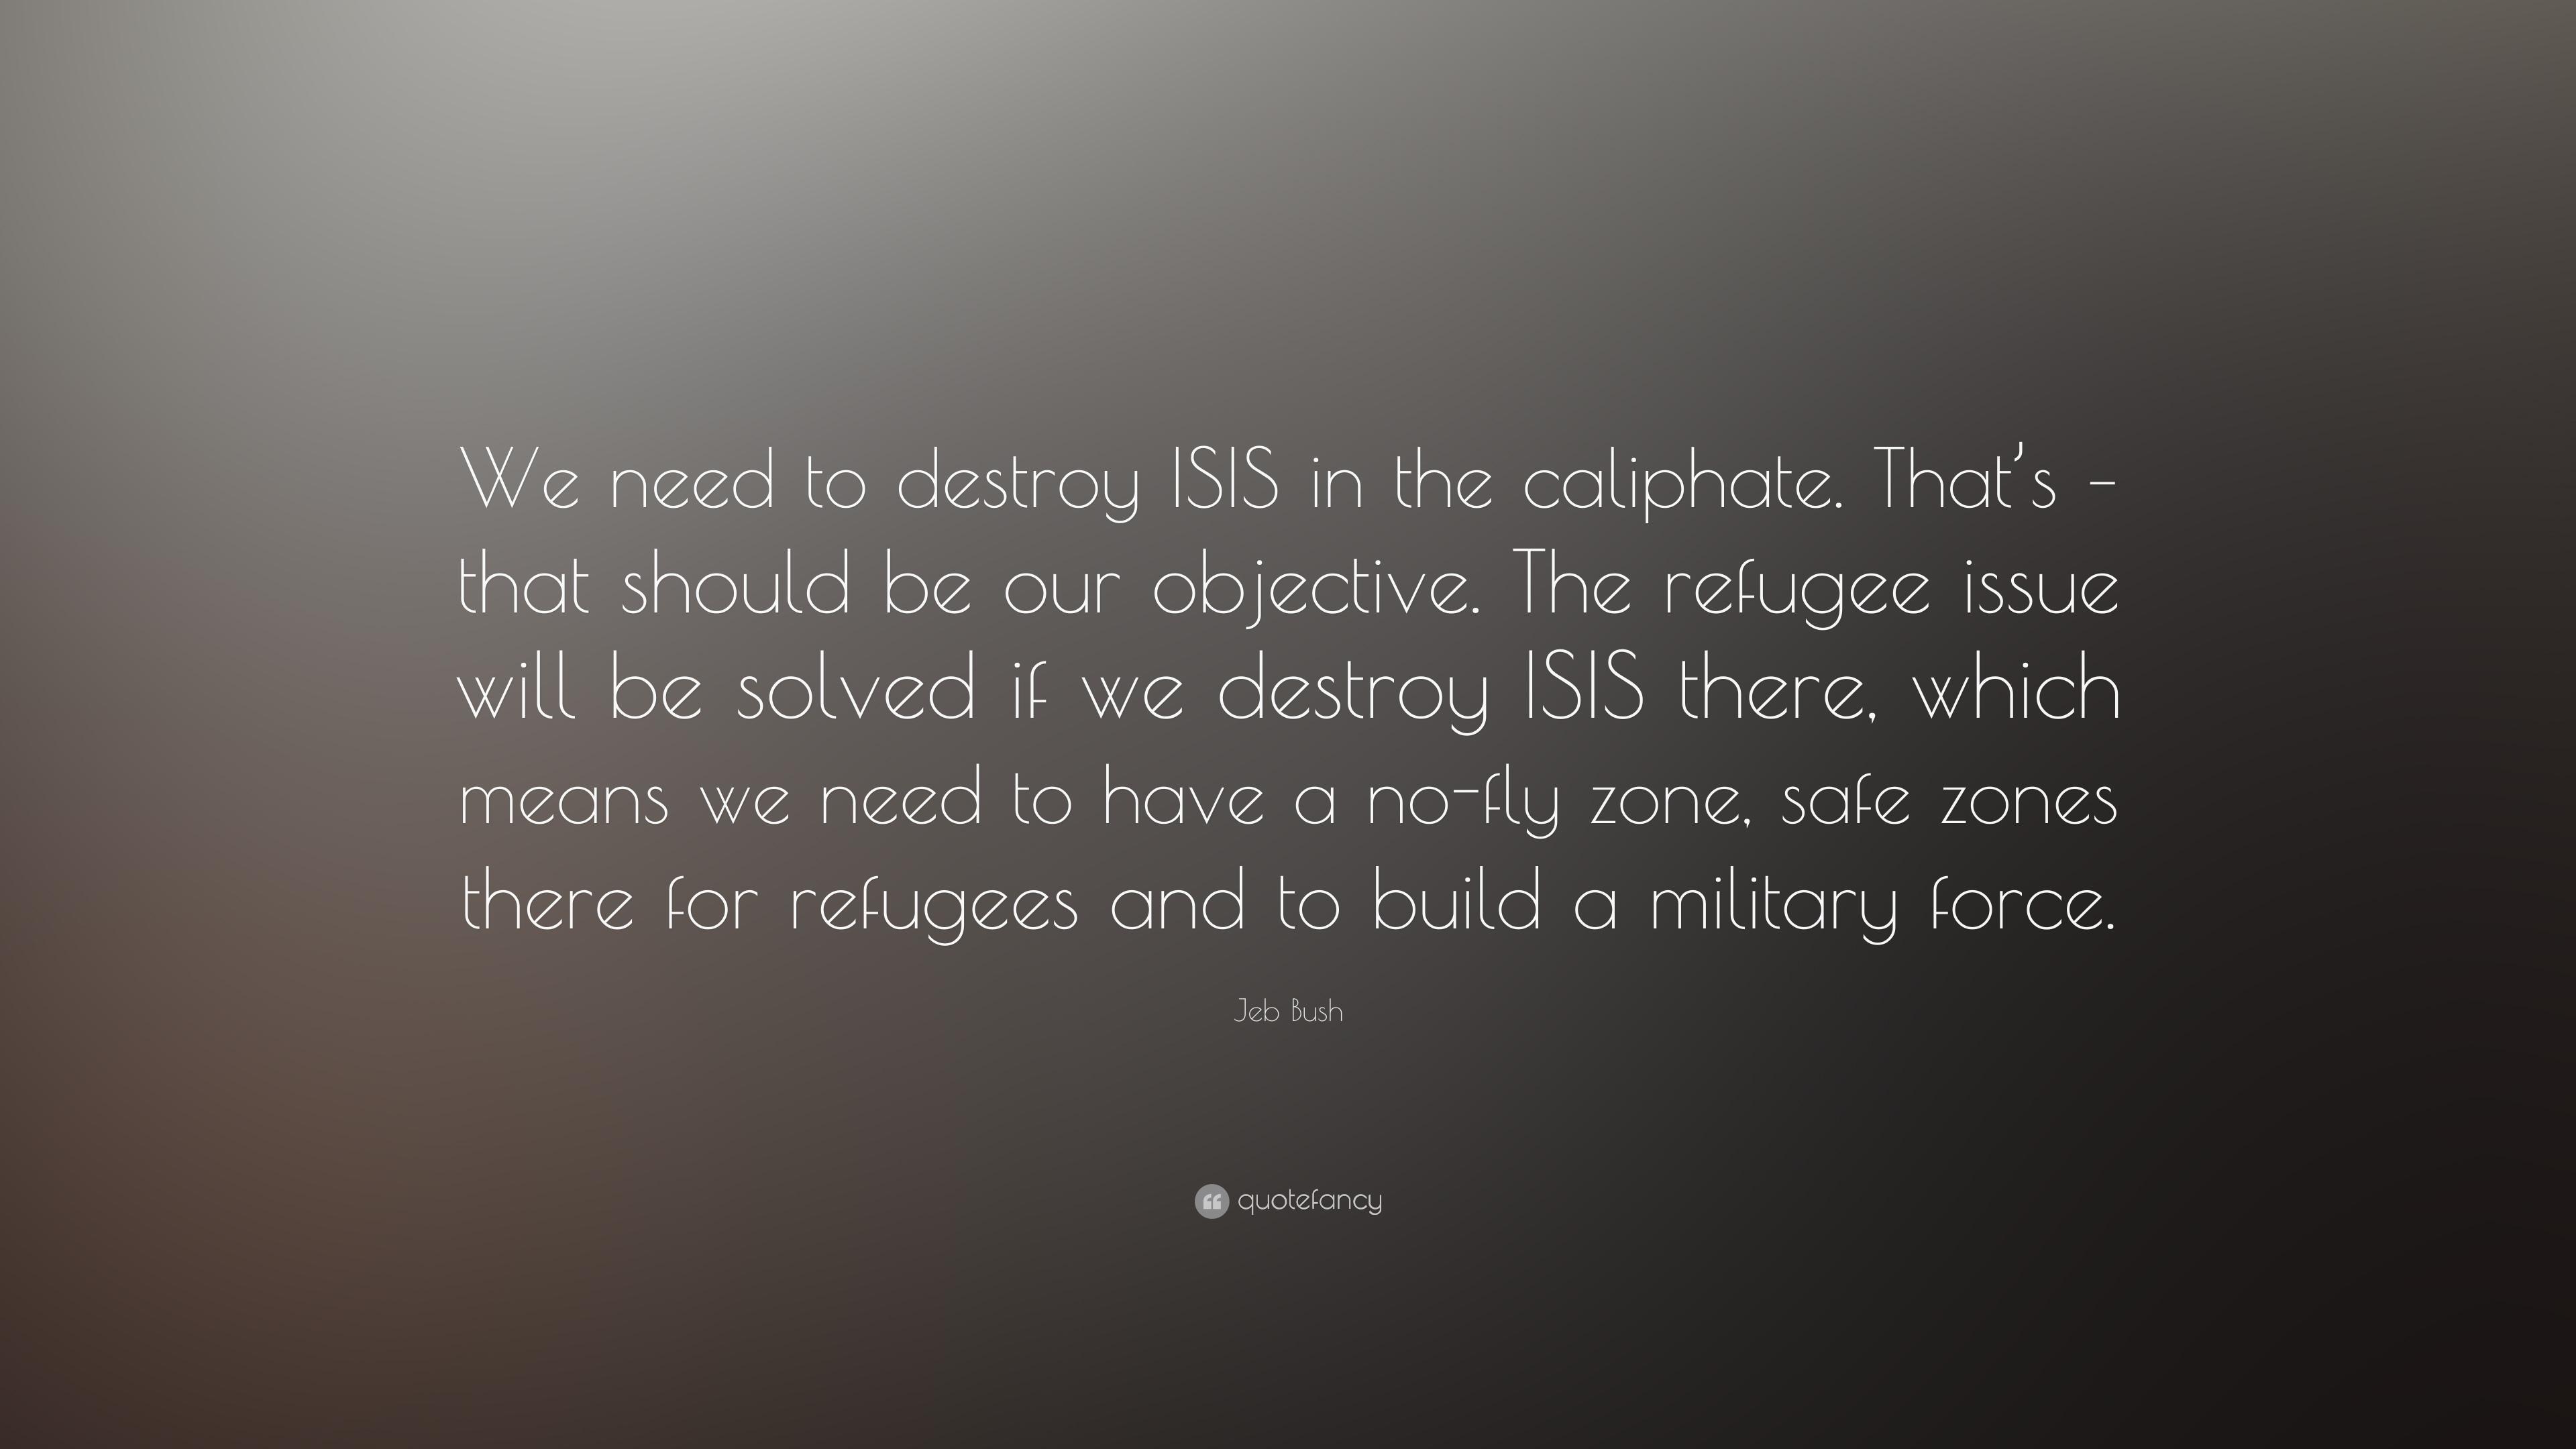 Jeb Bush Quote: “We need to destroy ISIS in the caliphate. That's